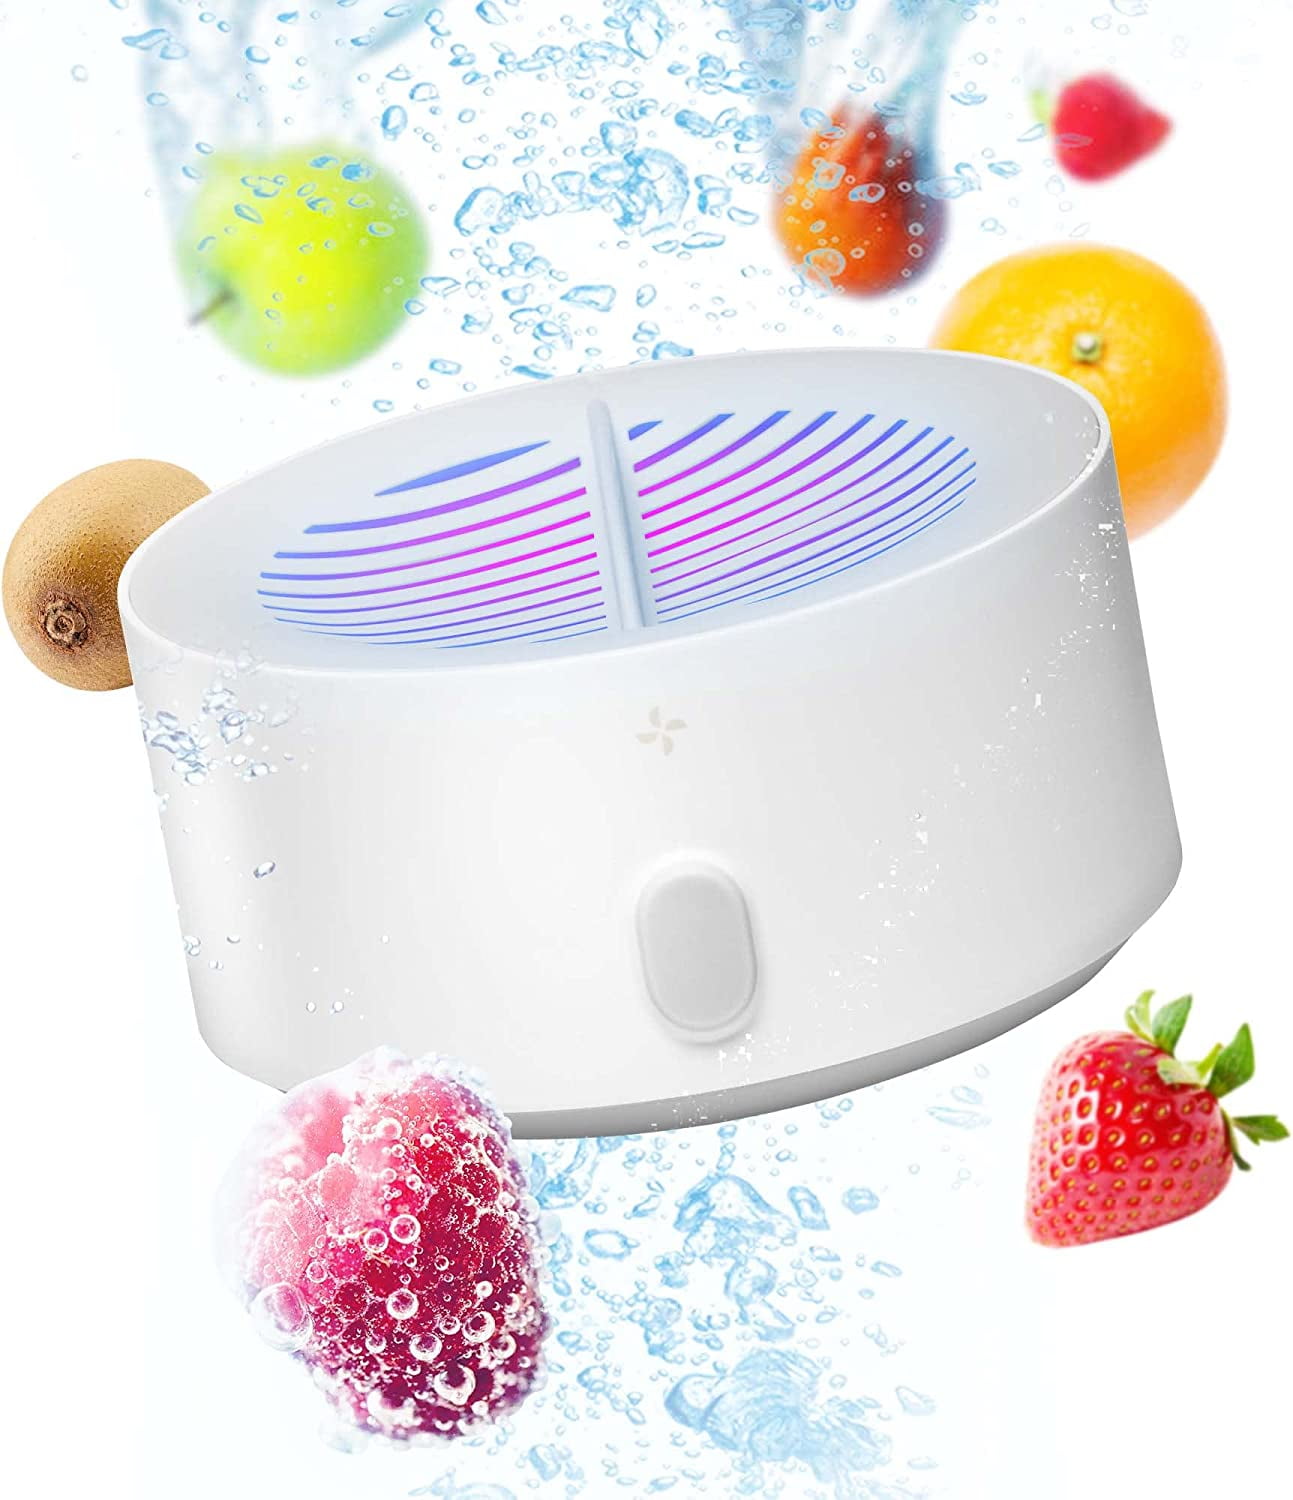 Fruit and Vegetable Washing Machine, fruit cleaner spinner device in water,  Waterproof fruit and vegetable Purifier clean washer - AliExpress